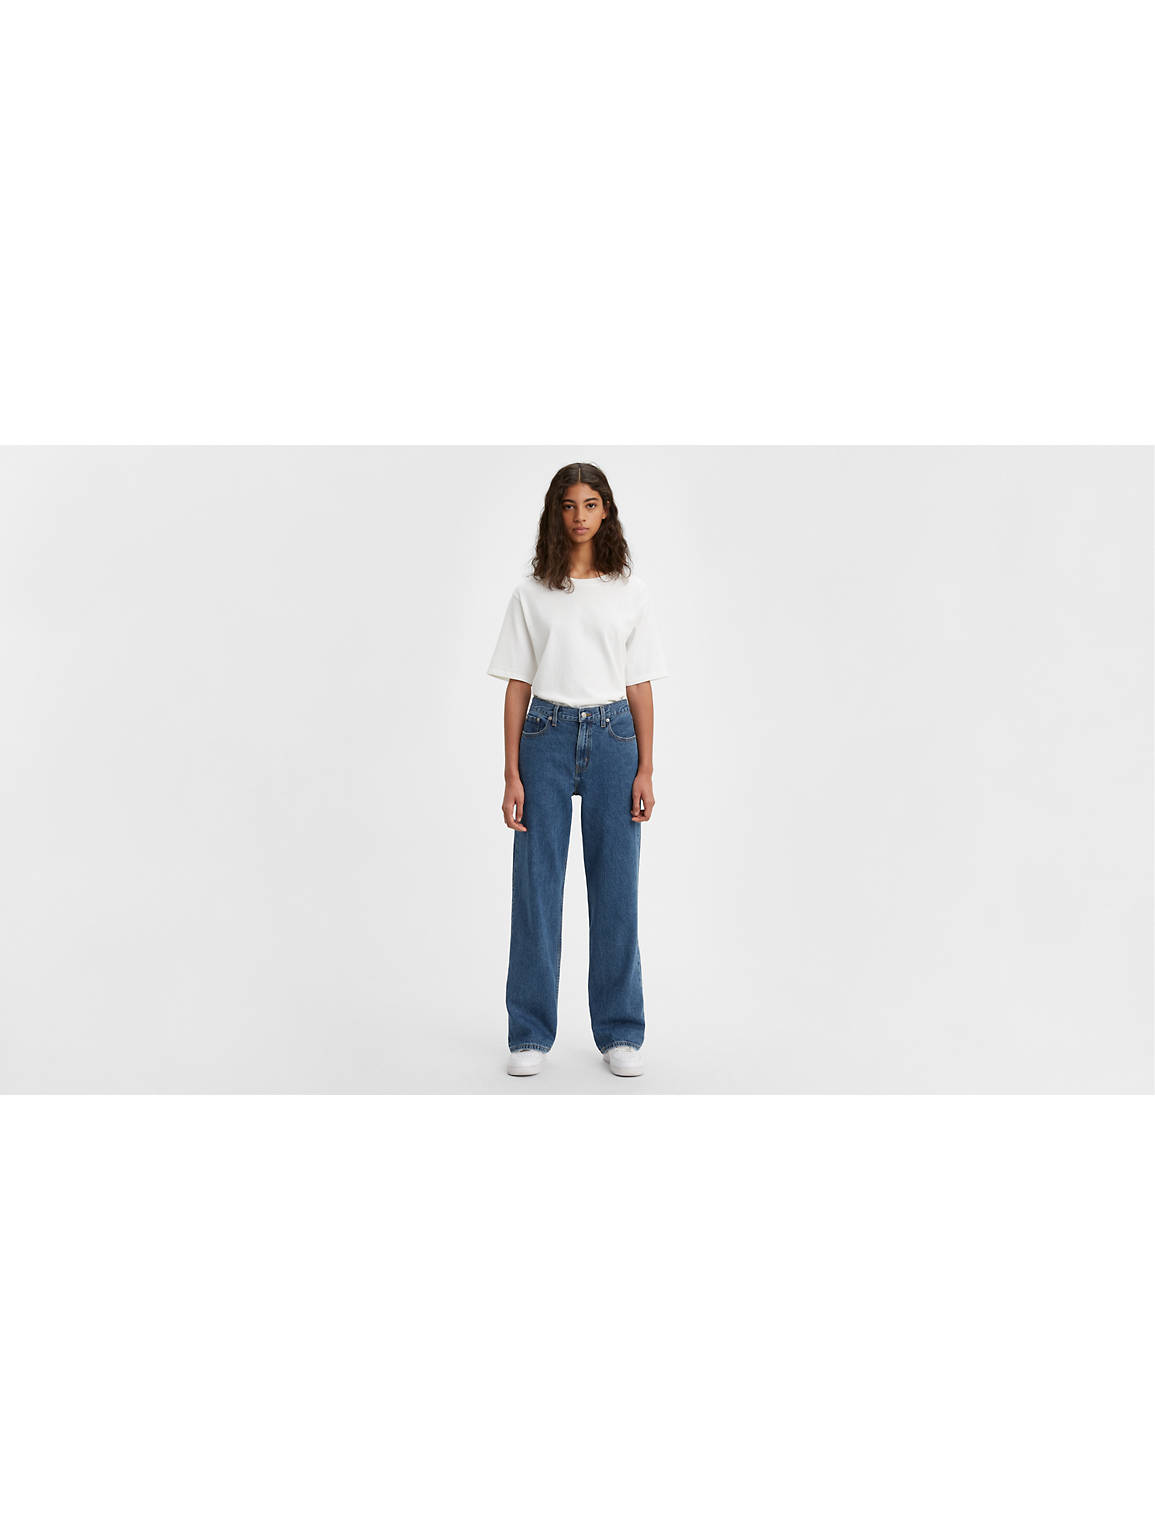 Loose Jeans, That Look Good On Everybody - By Hug for Trends